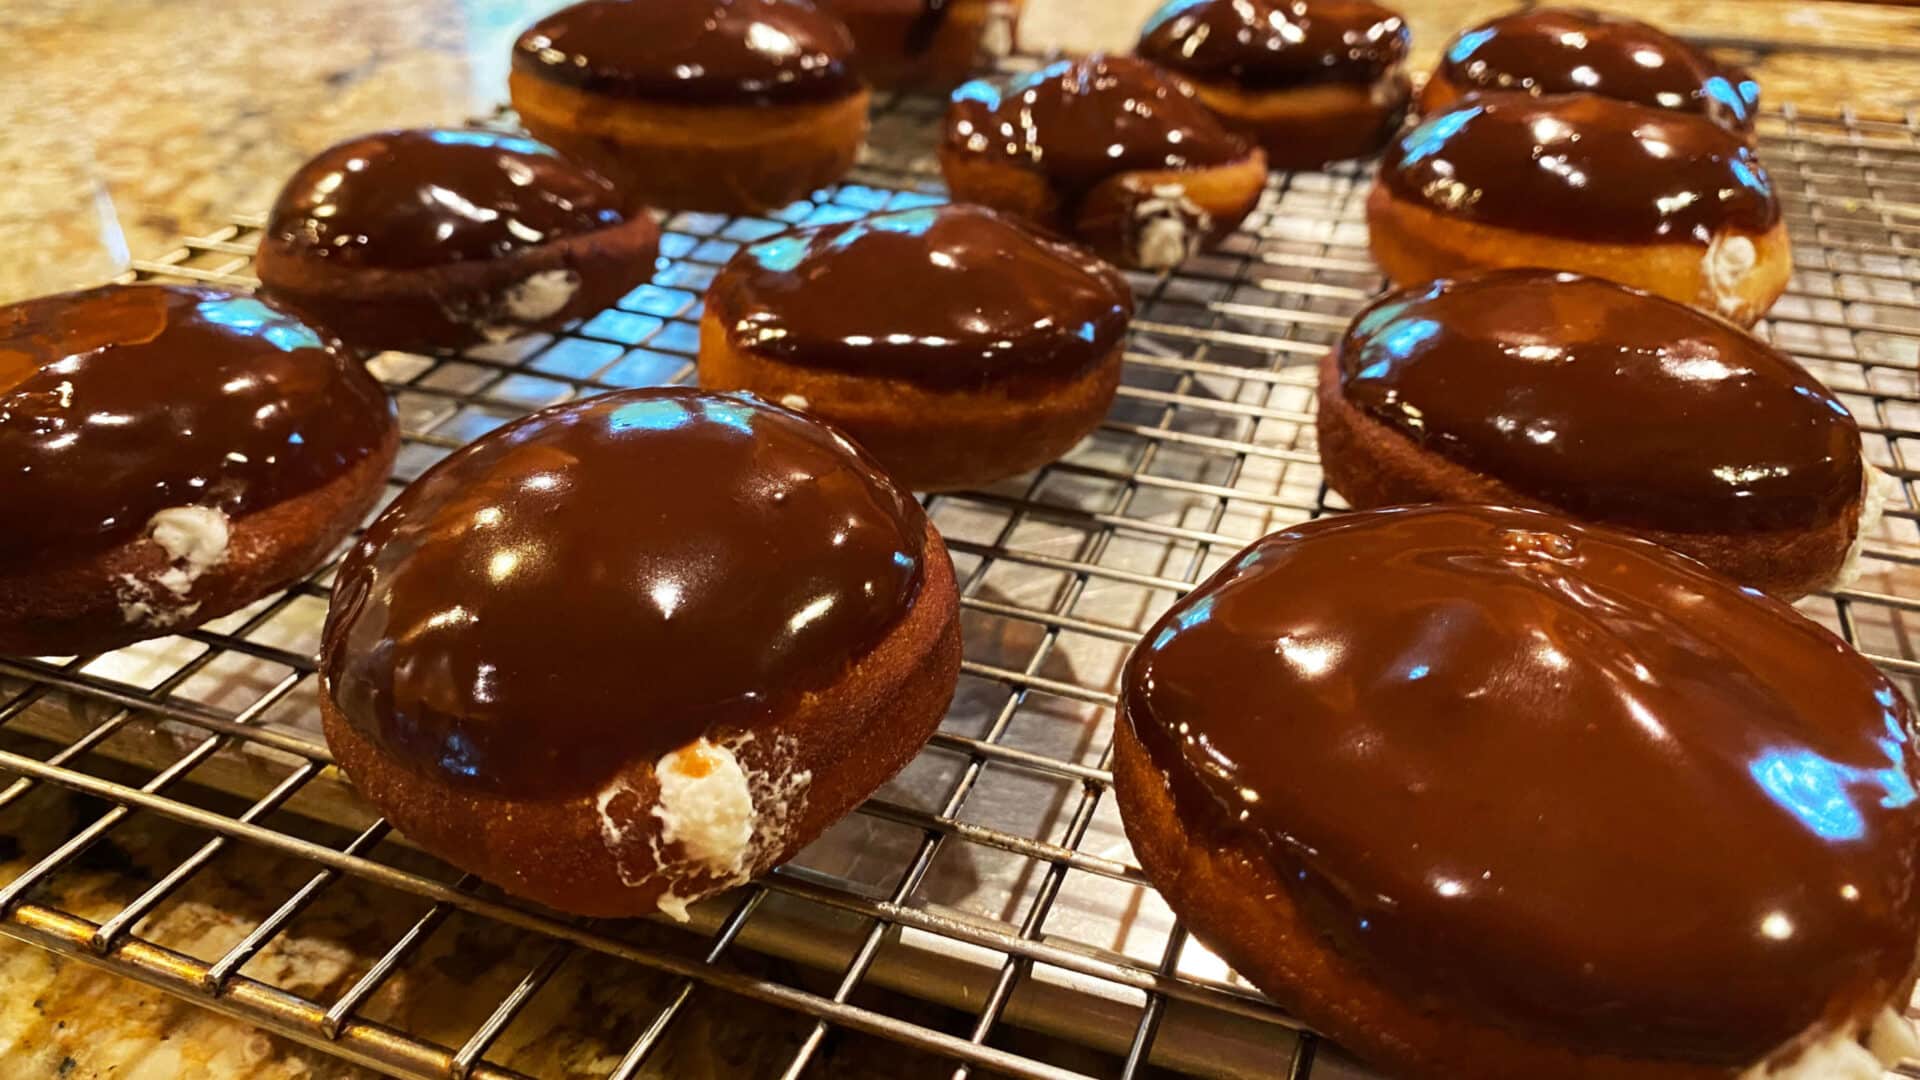 Golden round doughnuts with a chocolate glistening glaze on top and white cream oozing from inside